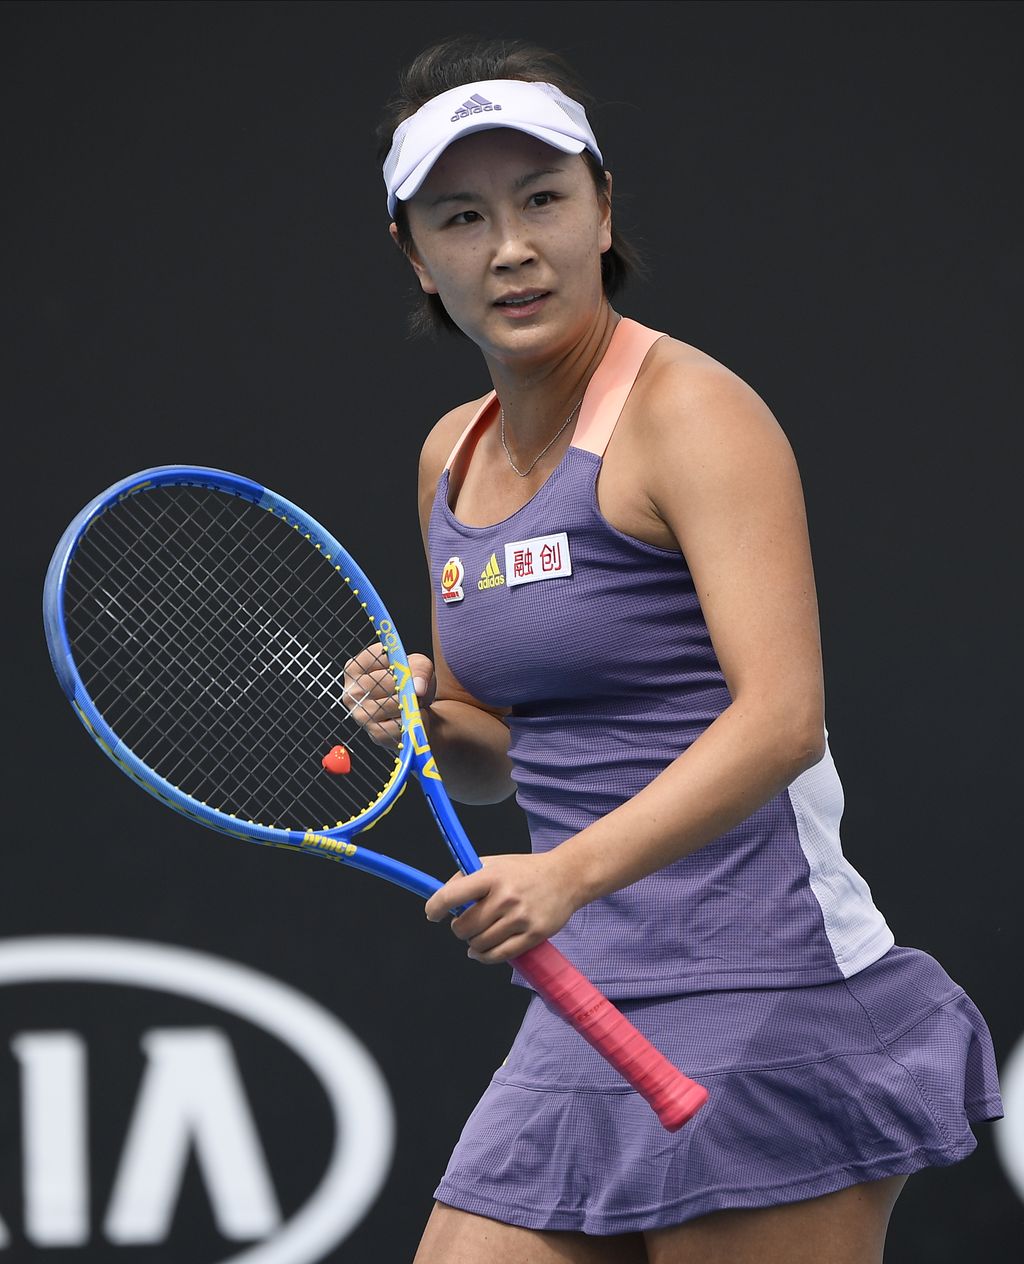 China's Peng Shuai reacts during her first round singles match against Japan's Nao Hibino at the Australian Open tennis championship in Melbourne, Australia, Tuesday, Jan. 21, 2020. (AP Photo/Andy Brownbill)